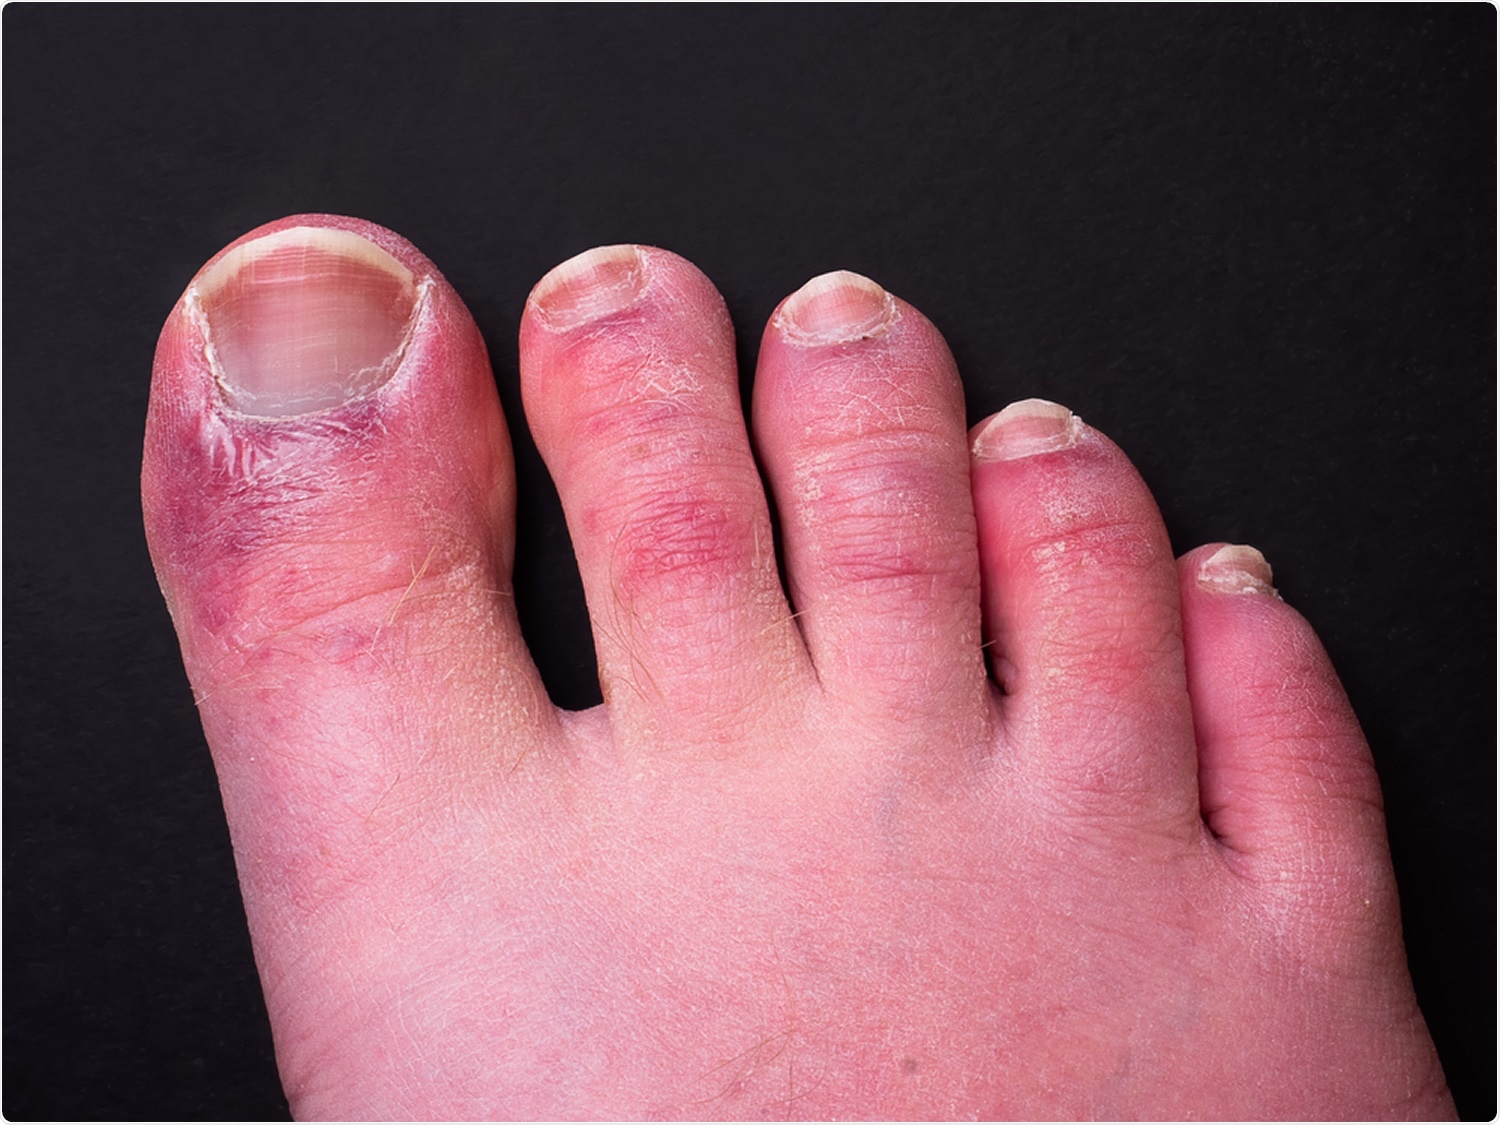 Study: Type I interferon response and vascular alteration in chilblain-like lesions during the COVID-19 outbreak. Image Credit:  Chris Curry / Shutterstock